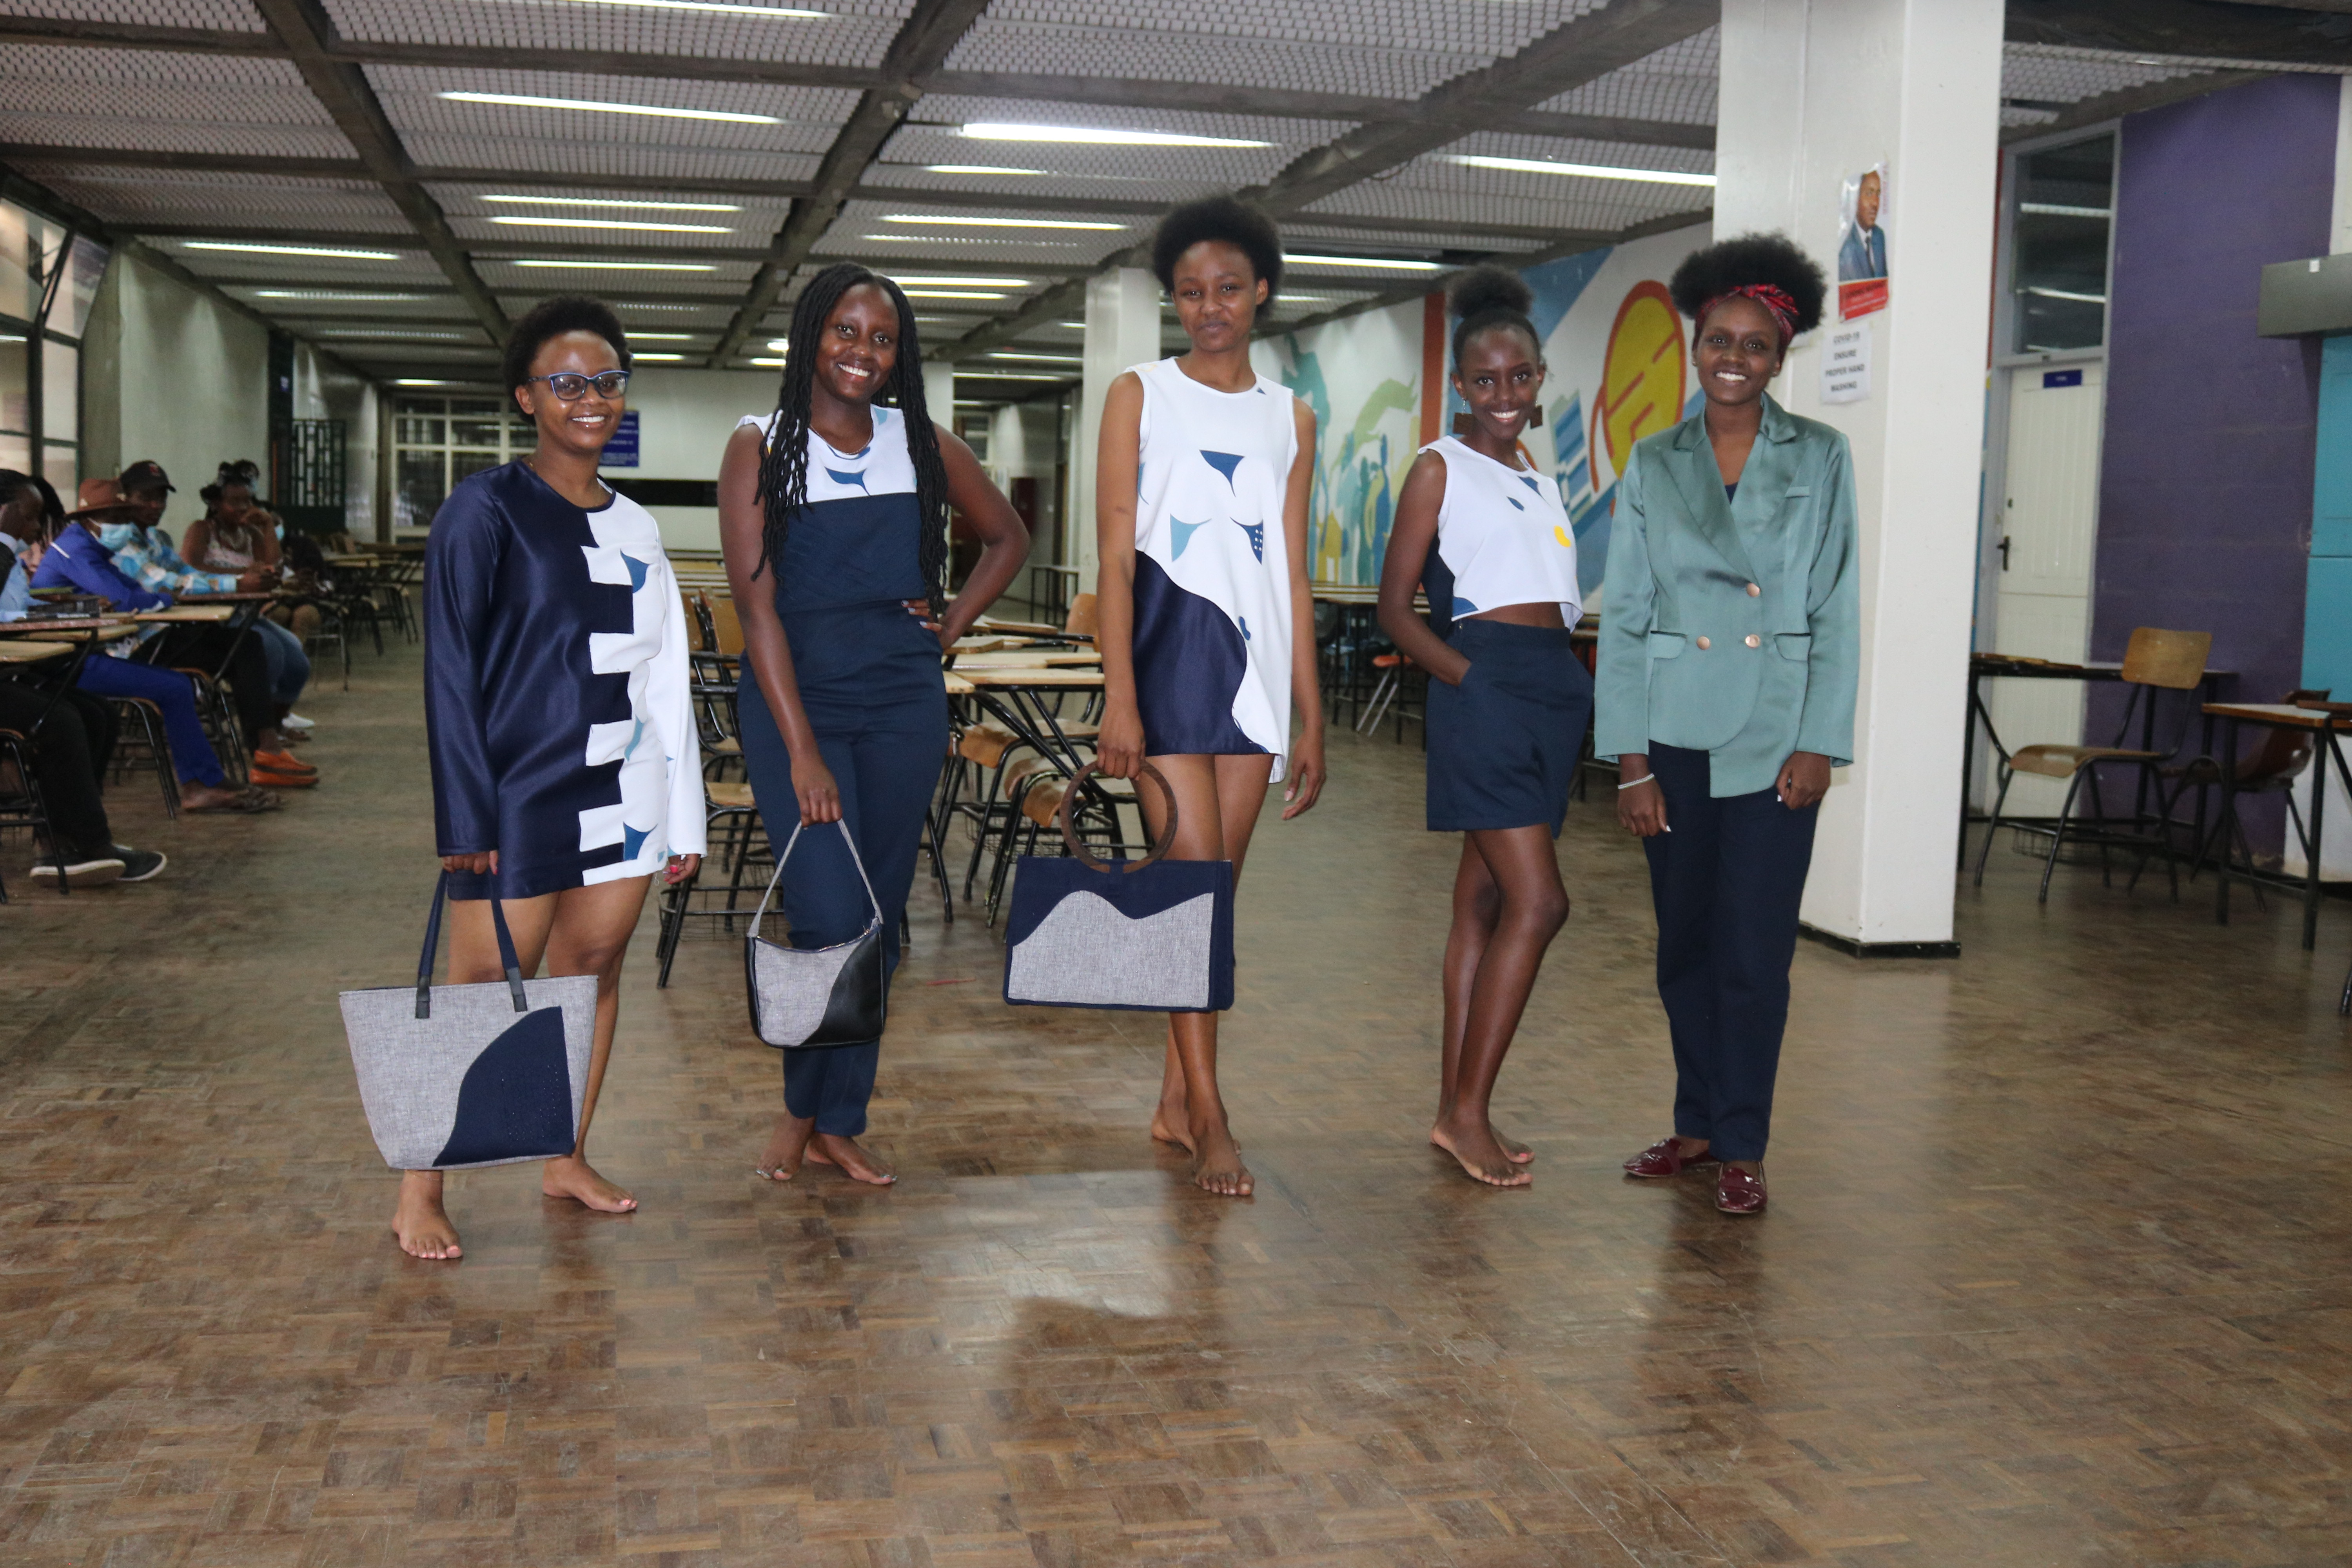 4th year fashion design student poses with models in her outfits